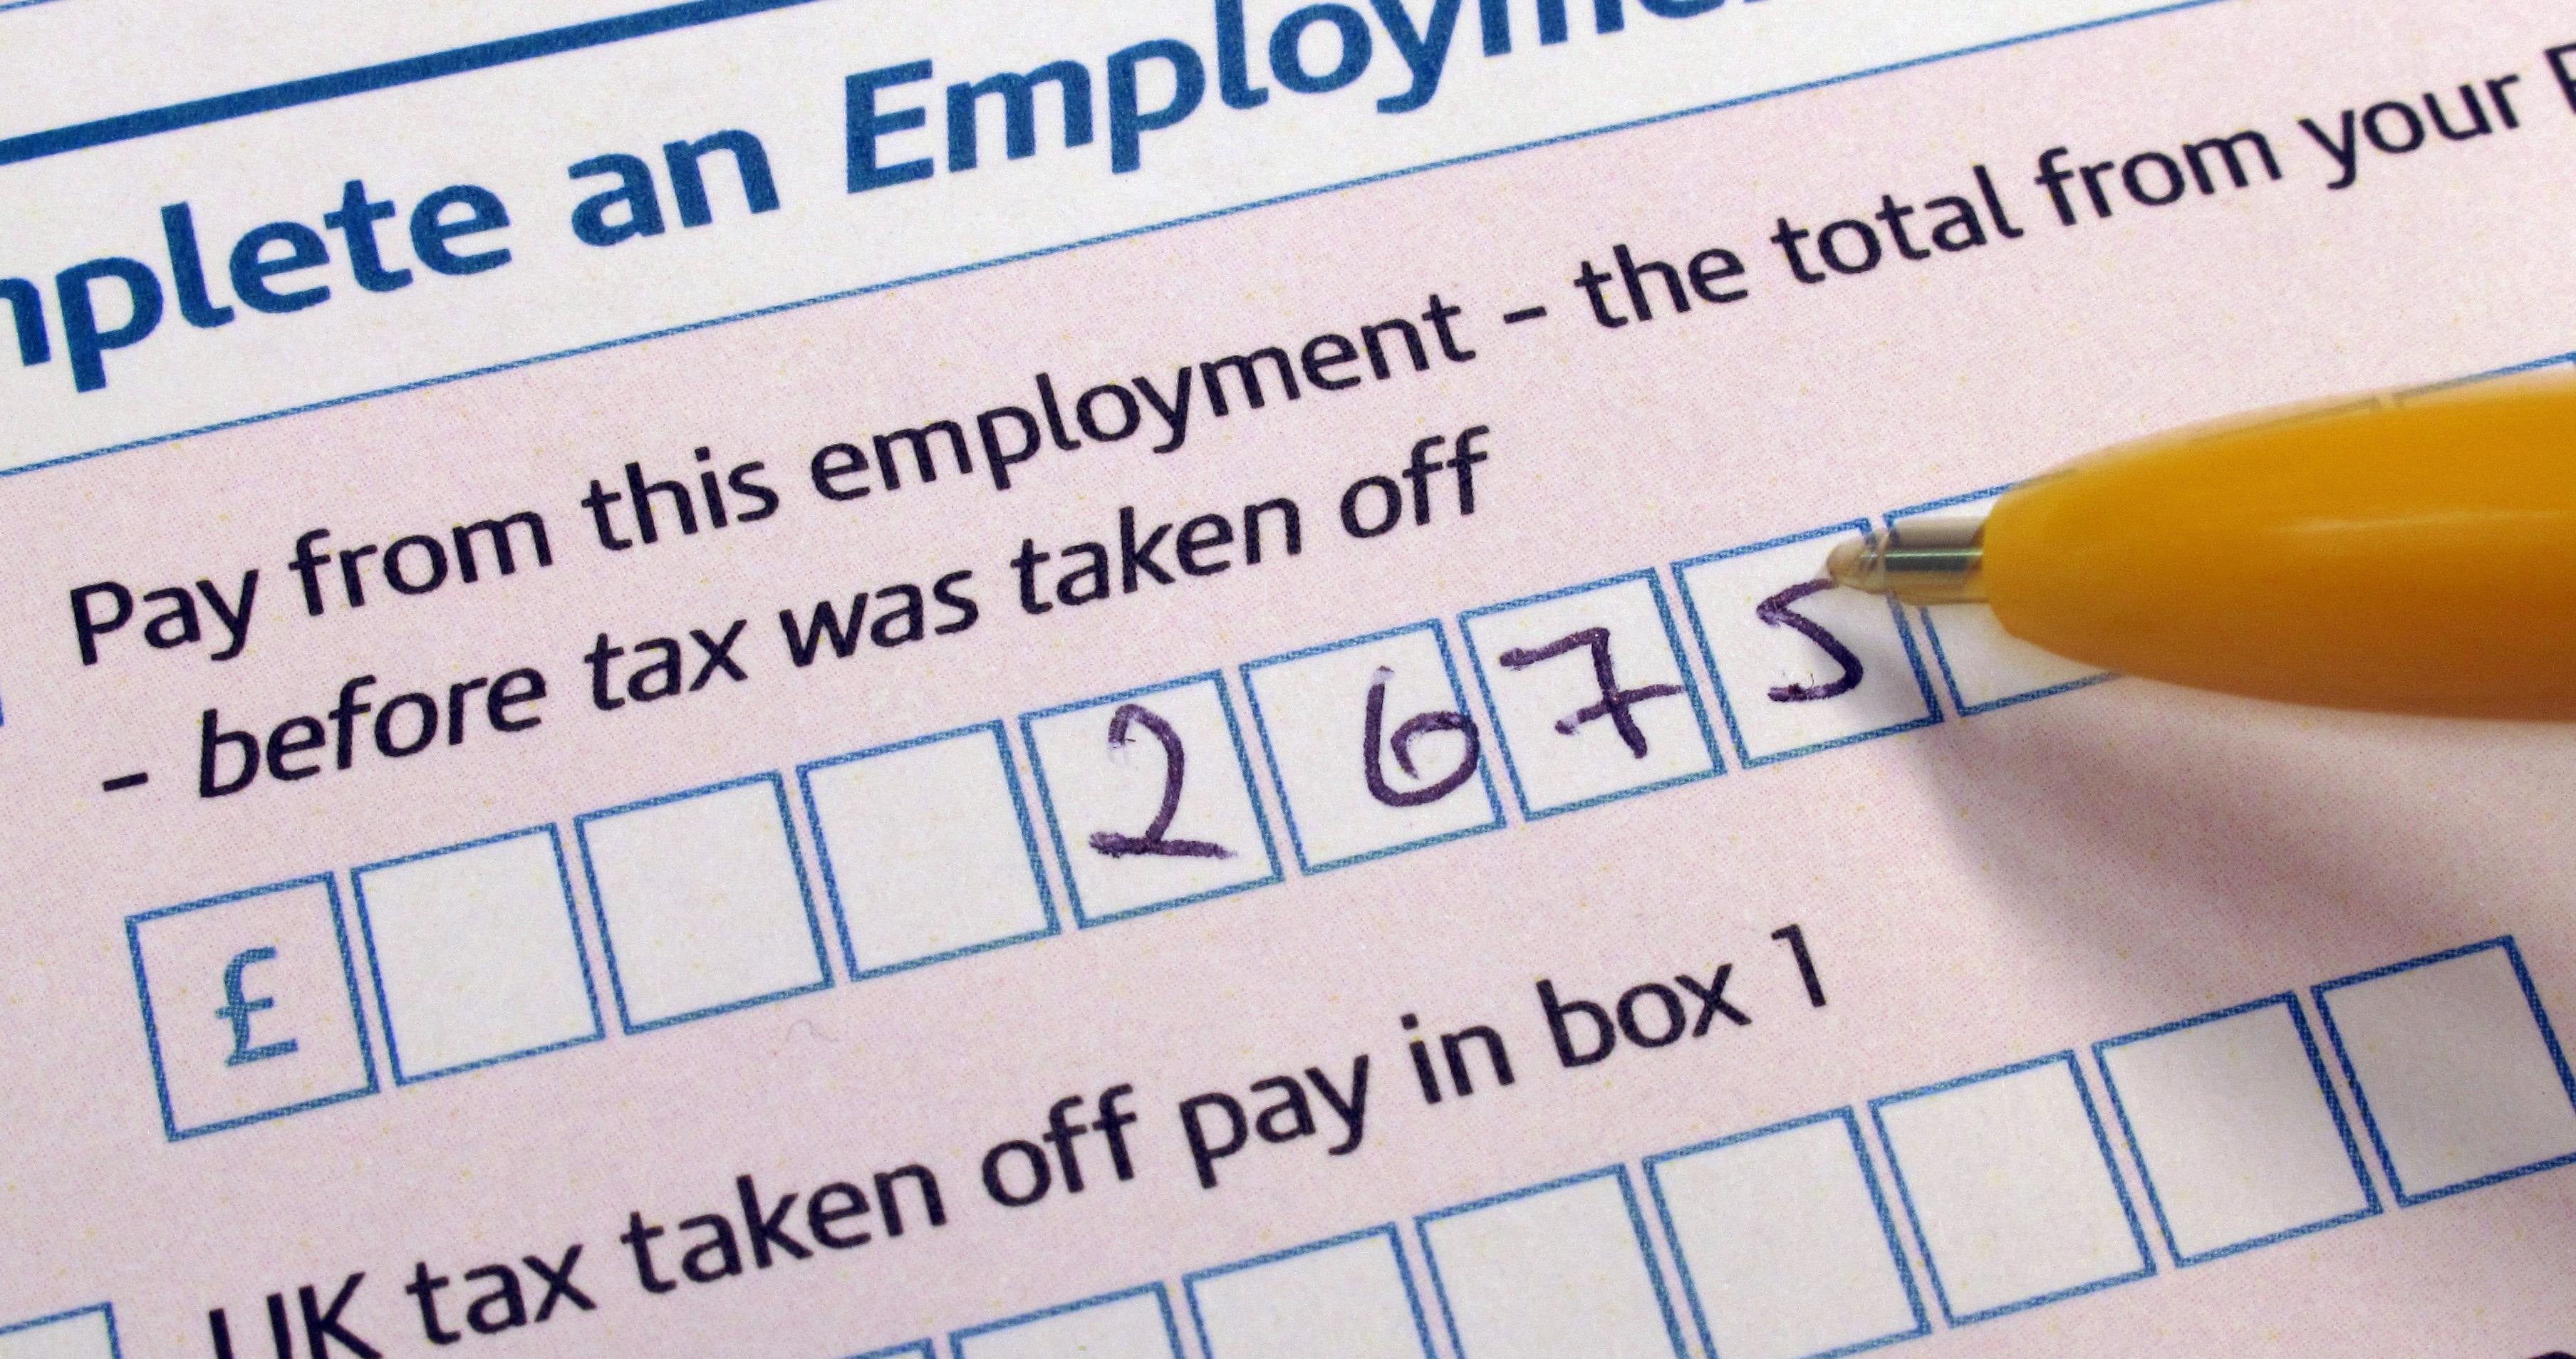 Measures to better protect people from agents pocketing excessive chunks of their tax repayments are being considered by the taxman (PA)